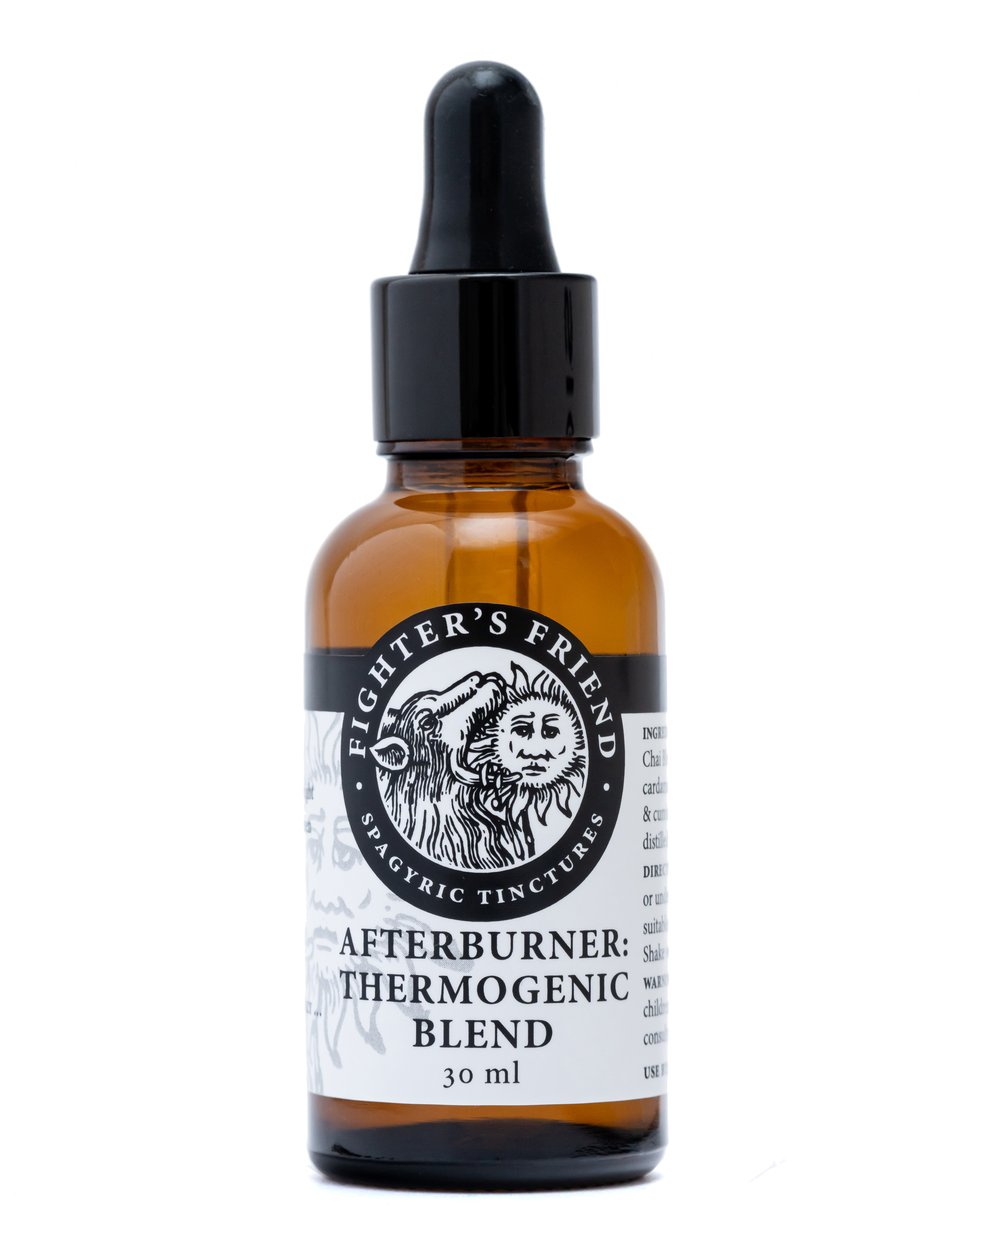 Image of AFTERBURNER: THERMOGENIC BLEND - Spagyric Tincture Blend - Fat Burner, Weight Cut